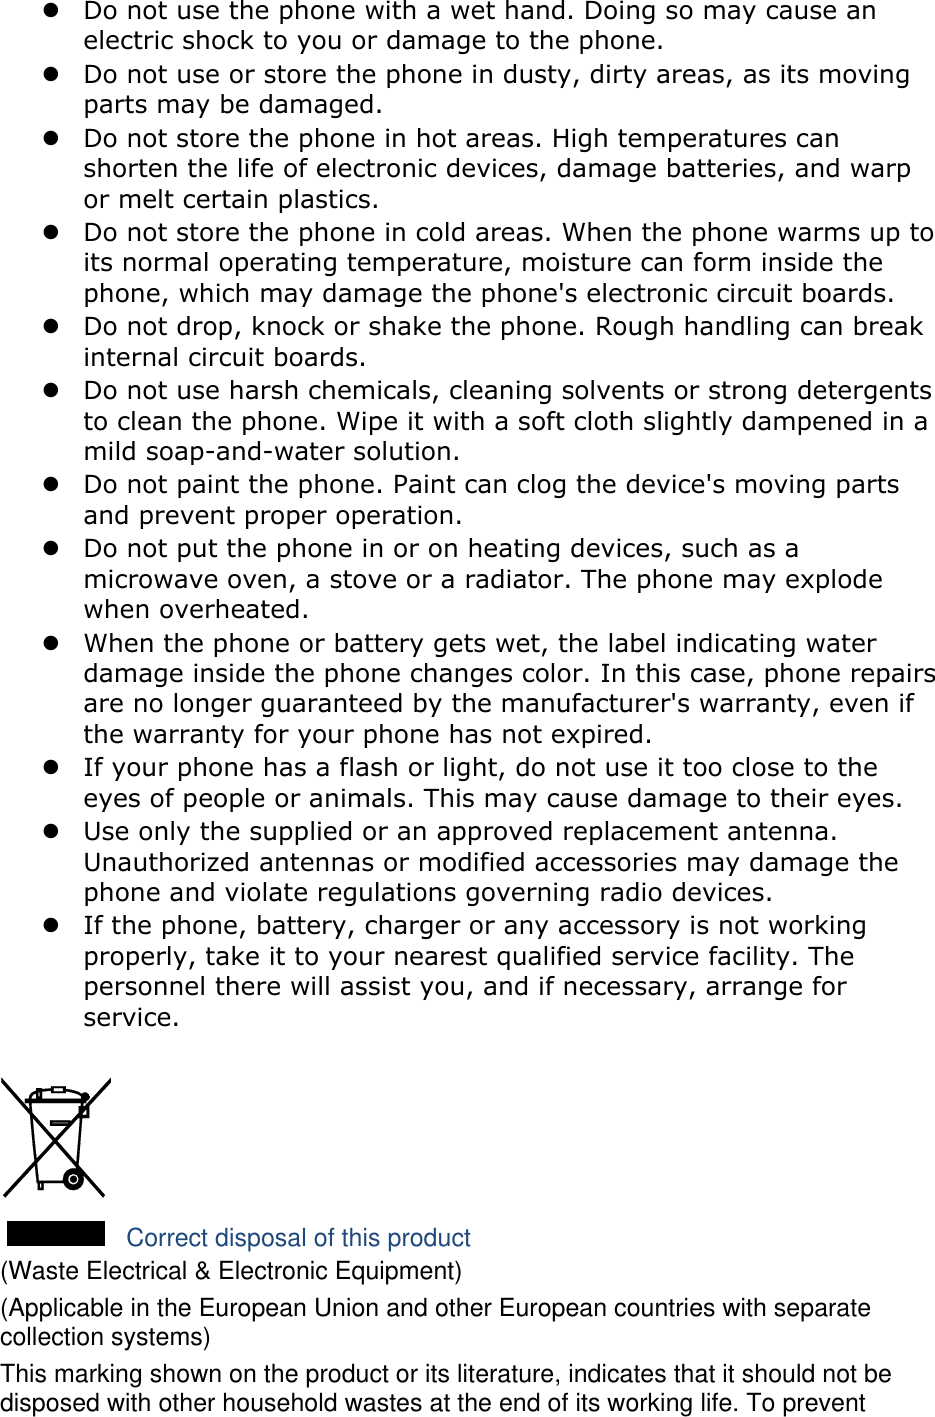 z Do not use the phone with a wet hand. Doing so may cause an electric shock to you or damage to the phone. z Do not use or store the phone in dusty, dirty areas, as its moving parts may be damaged. z Do not store the phone in hot areas. High temperatures can shorten the life of electronic devices, damage batteries, and warp or melt certain plastics. z Do not store the phone in cold areas. When the phone warms up to its normal operating temperature, moisture can form inside the phone, which may damage the phone&apos;s electronic circuit boards. z Do not drop, knock or shake the phone. Rough handling can break internal circuit boards. z Do not use harsh chemicals, cleaning solvents or strong detergents to clean the phone. Wipe it with a soft cloth slightly dampened in a mild soap-and-water solution. z Do not paint the phone. Paint can clog the device&apos;s moving parts and prevent proper operation. z Do not put the phone in or on heating devices, such as a microwave oven, a stove or a radiator. The phone may explode when overheated. z When the phone or battery gets wet, the label indicating water damage inside the phone changes color. In this case, phone repairs are no longer guaranteed by the manufacturer&apos;s warranty, even if the warranty for your phone has not expired.   z If your phone has a flash or light, do not use it too close to the eyes of people or animals. This may cause damage to their eyes. z Use only the supplied or an approved replacement antenna. Unauthorized antennas or modified accessories may damage the phone and violate regulations governing radio devices. z If the phone, battery, charger or any accessory is not working properly, take it to your nearest qualified service facility. The personnel there will assist you, and if necessary, arrange for service.   Correct disposal of this product (Waste Electrical &amp; Electronic Equipment) (Applicable in the European Union and other European countries with separate collection systems) This marking shown on the product or its literature, indicates that it should not be disposed with other household wastes at the end of its working life. To prevent 